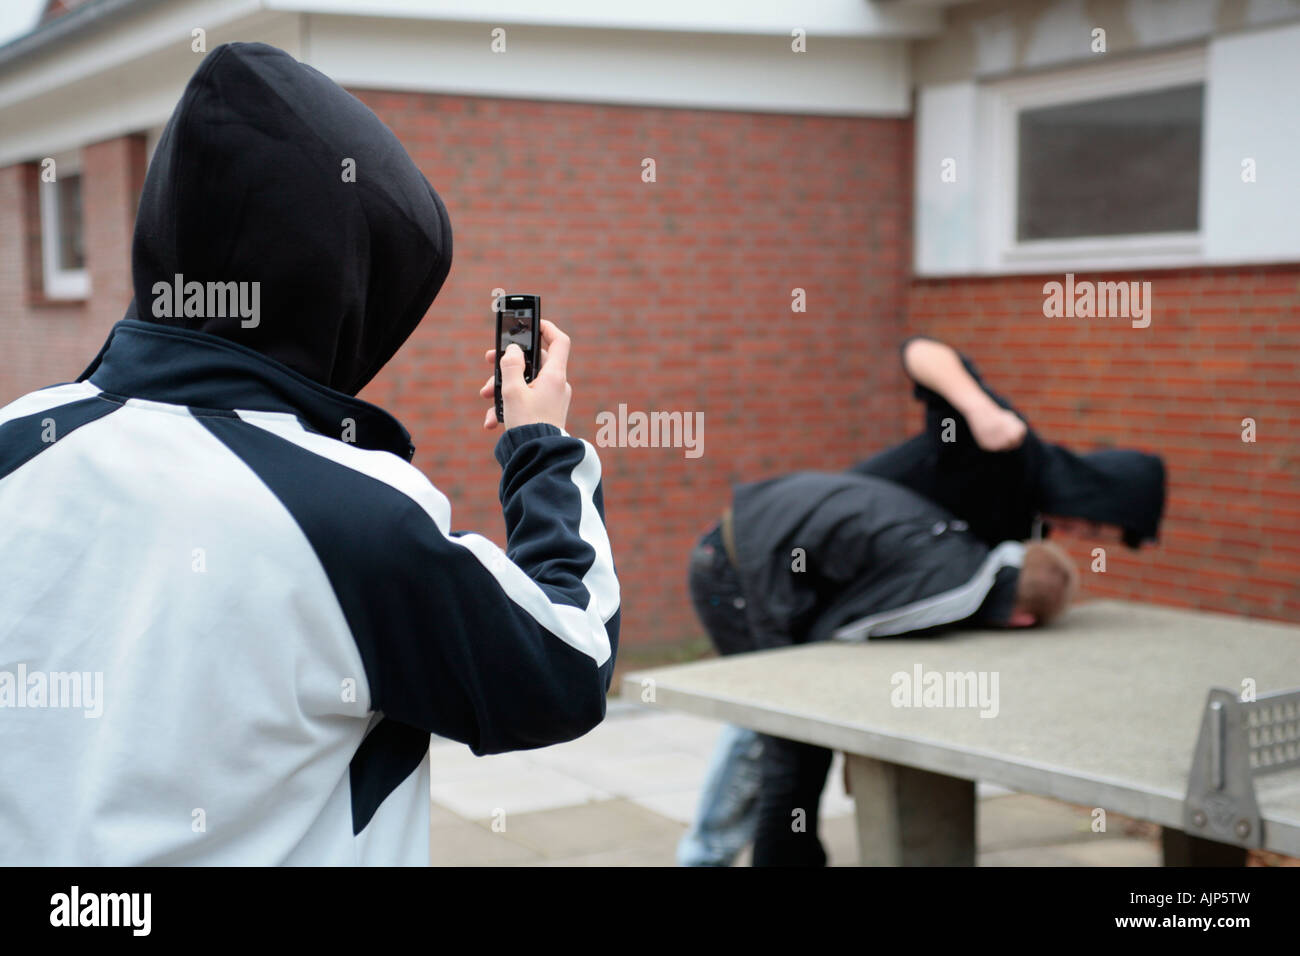 two fighting boys are being recorded by mobile phone Stock Photo